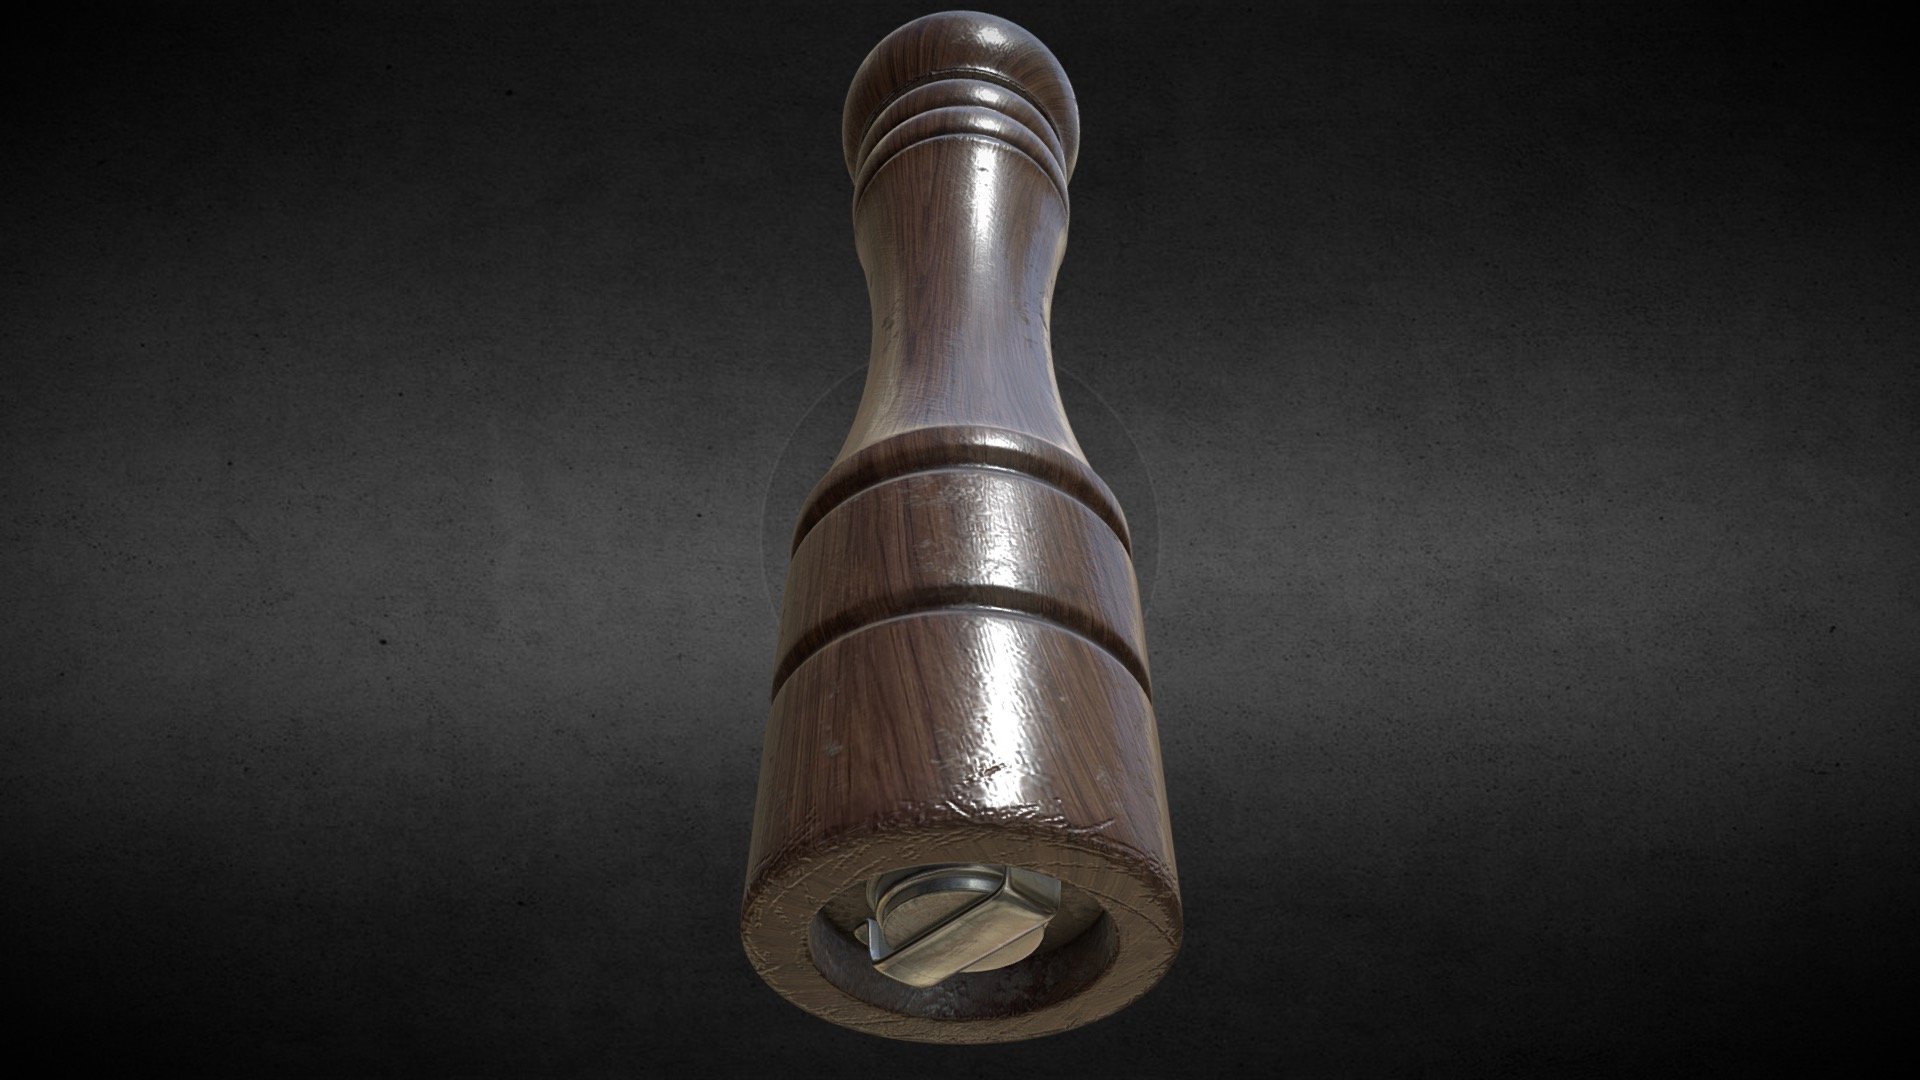 Just a pepper mill I made with Blender and textured in Substance Painter 3d model